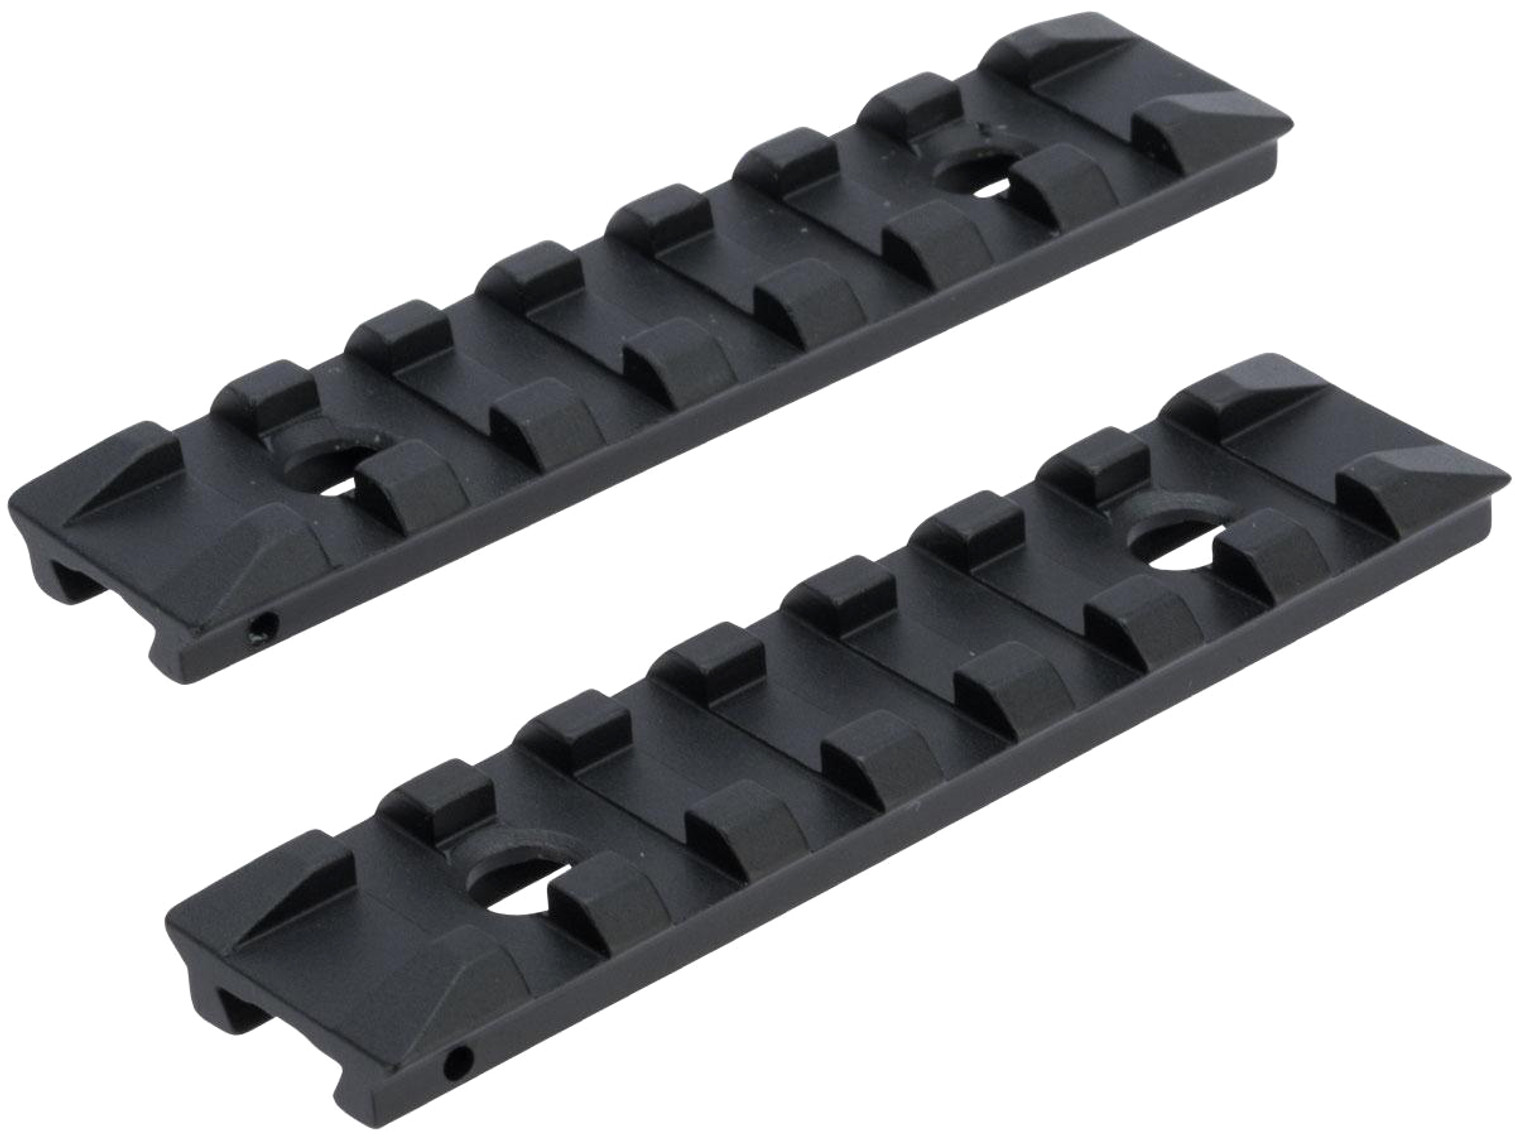 AIM Sports Low-Profile Rail for KRISS Vector Dovetail Mounts